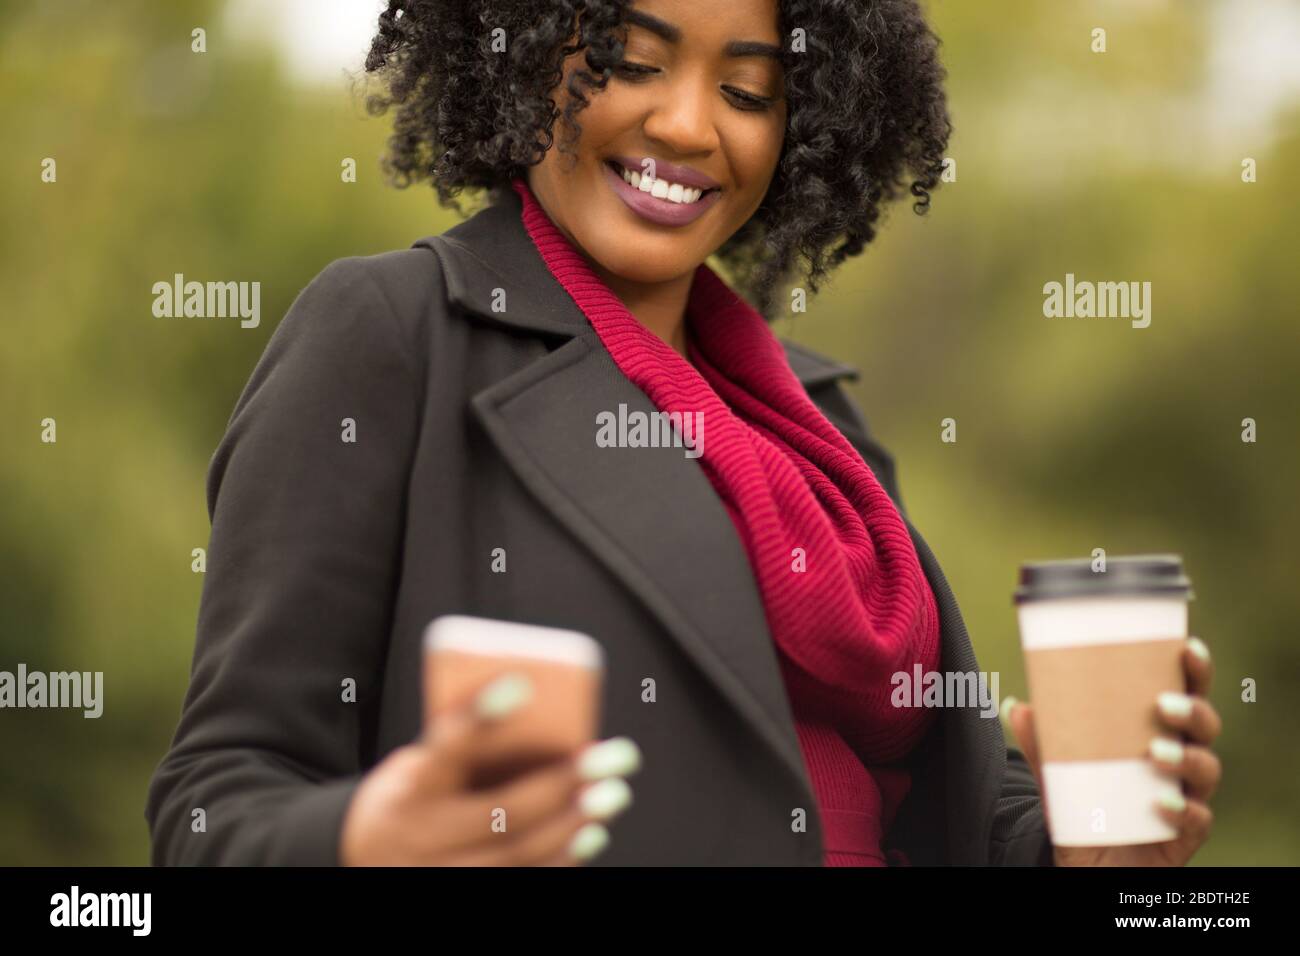 African American Woman texting and drinking coffee. Stock Photo